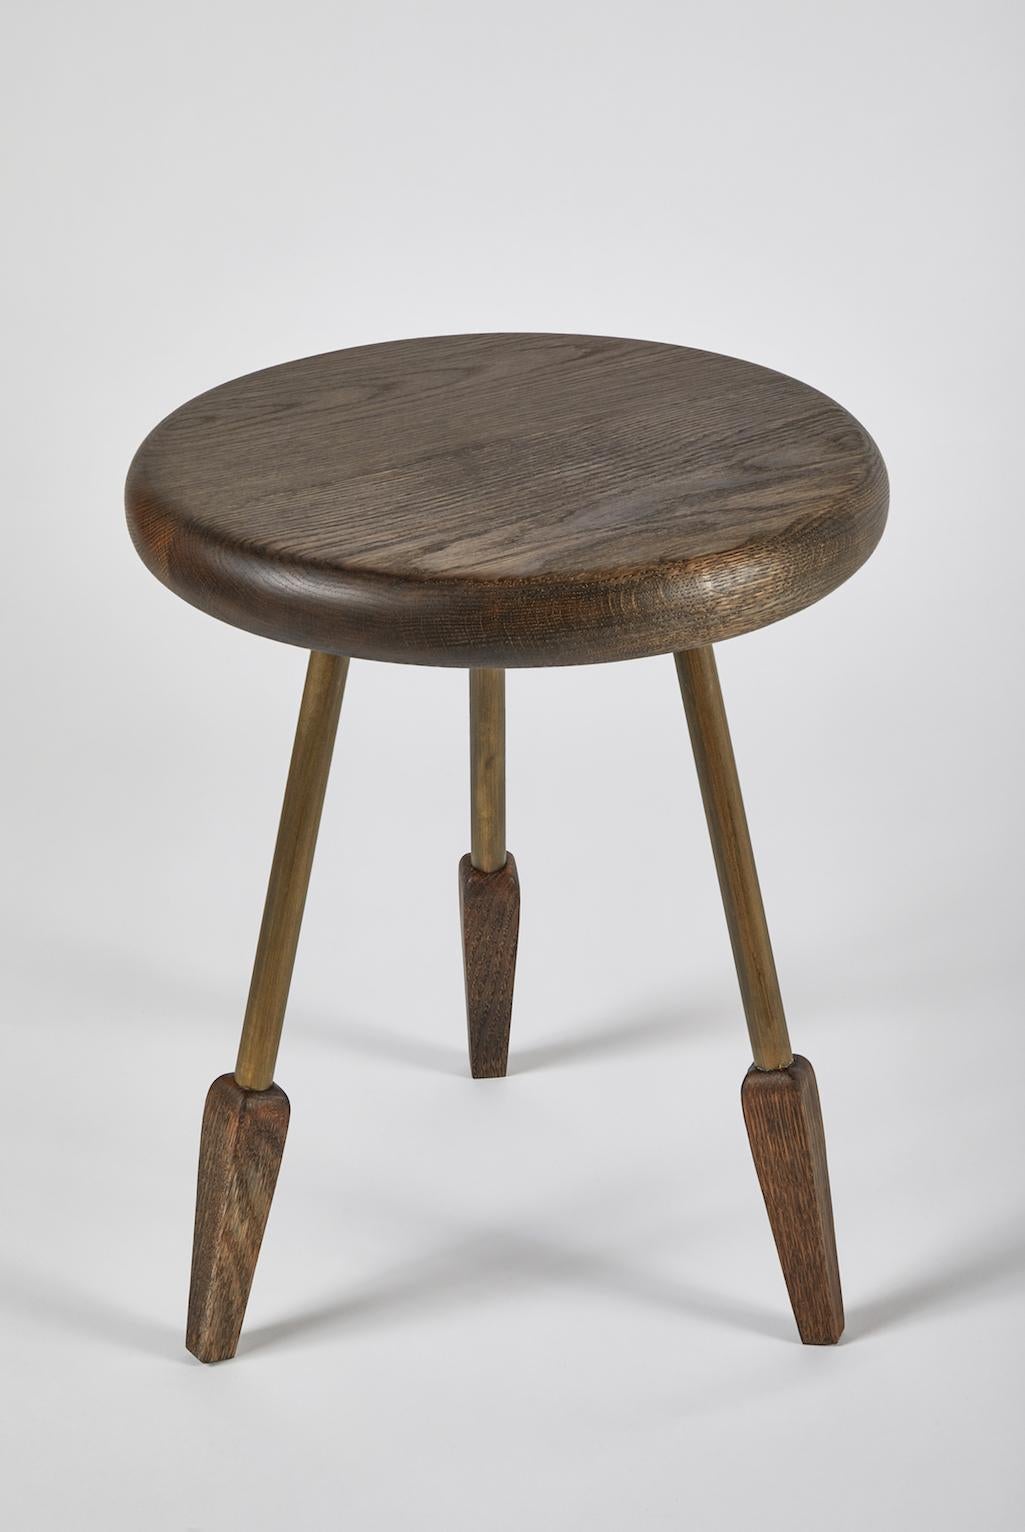 American Oxidized White Oak Rounded Edge, Brass Legs Milking Stool by Casey McCafferty For Sale